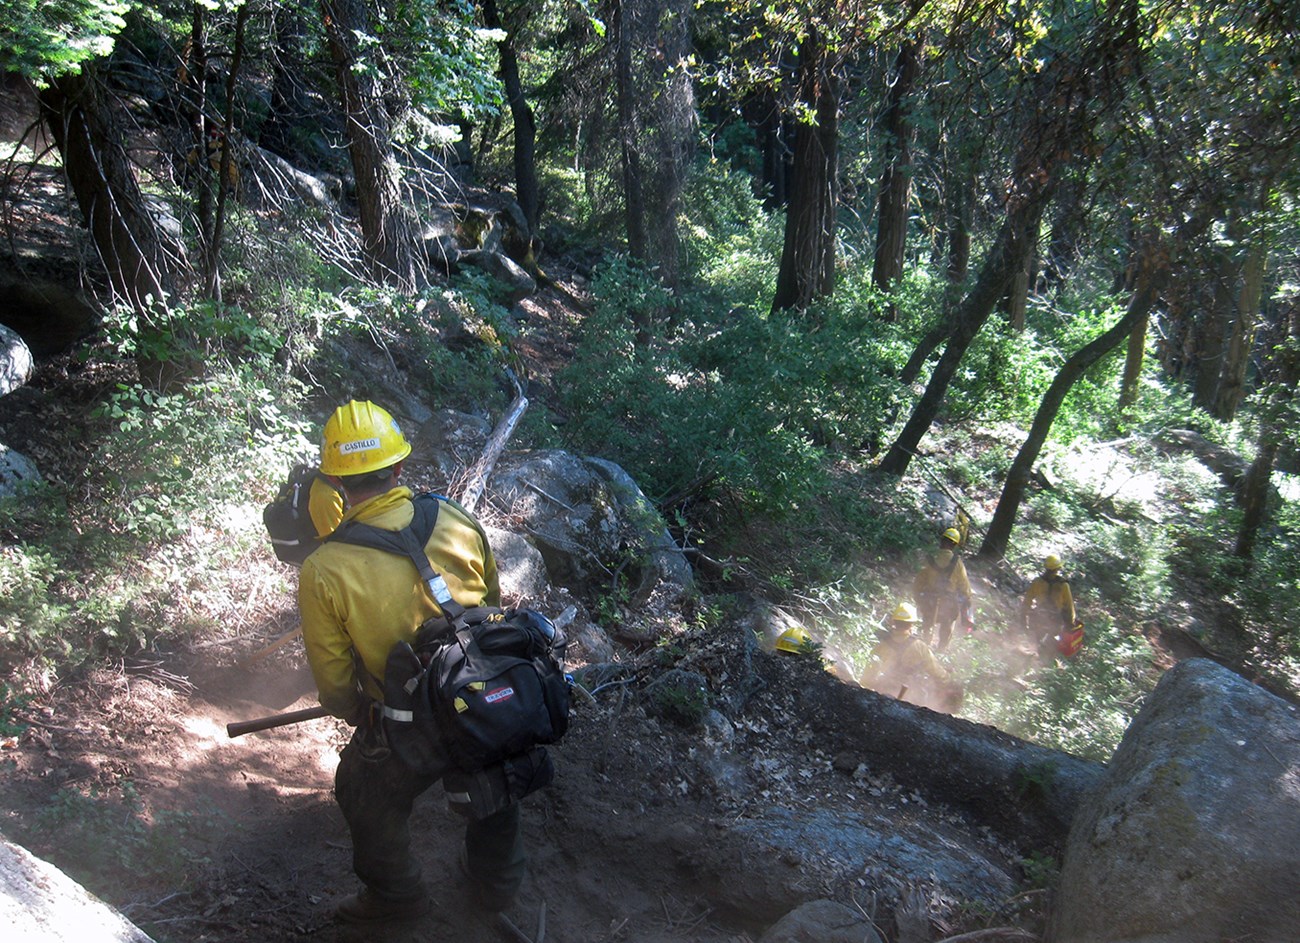 A firefighter stands on a fireline on a steep hill with other firefighters below.